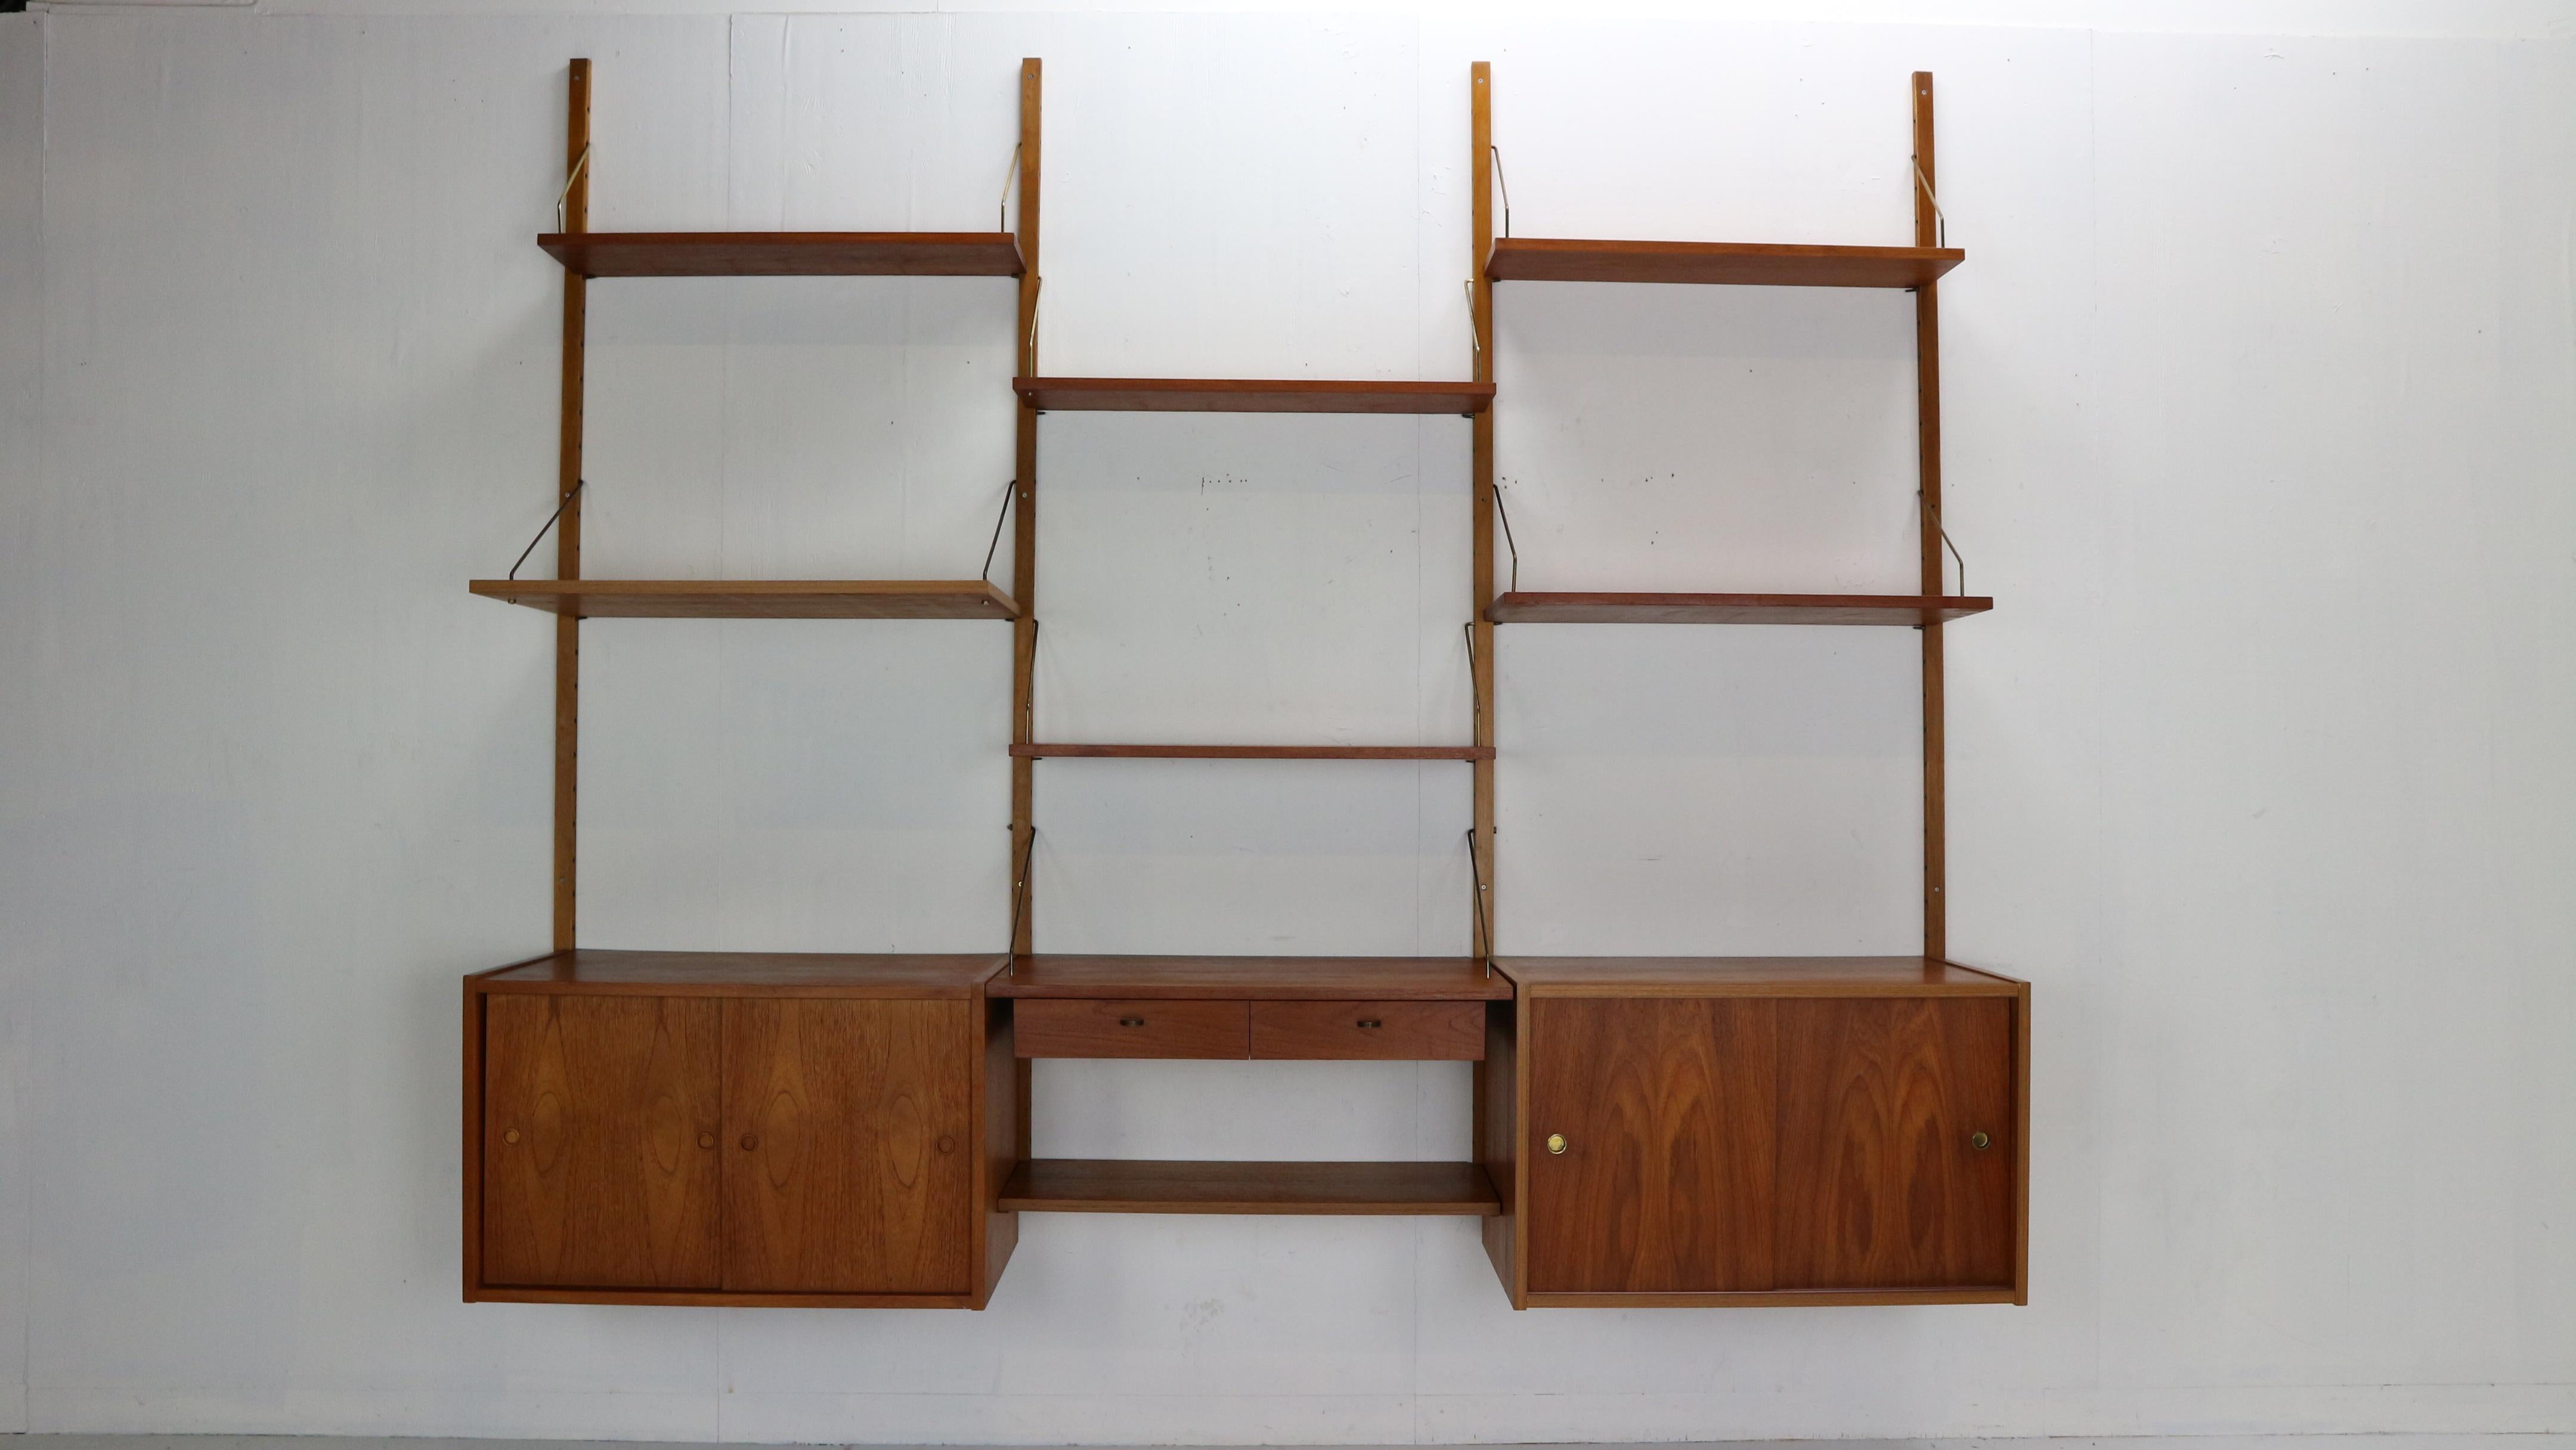 Mid-Century Modern period modular wall unit in the style of Poul Cadovius made in 1960s period, Denmark.
Teak modular wall unit consists of six shelves, two cabinets with shelves inside, desk space with two small drawers and extra shelve under.